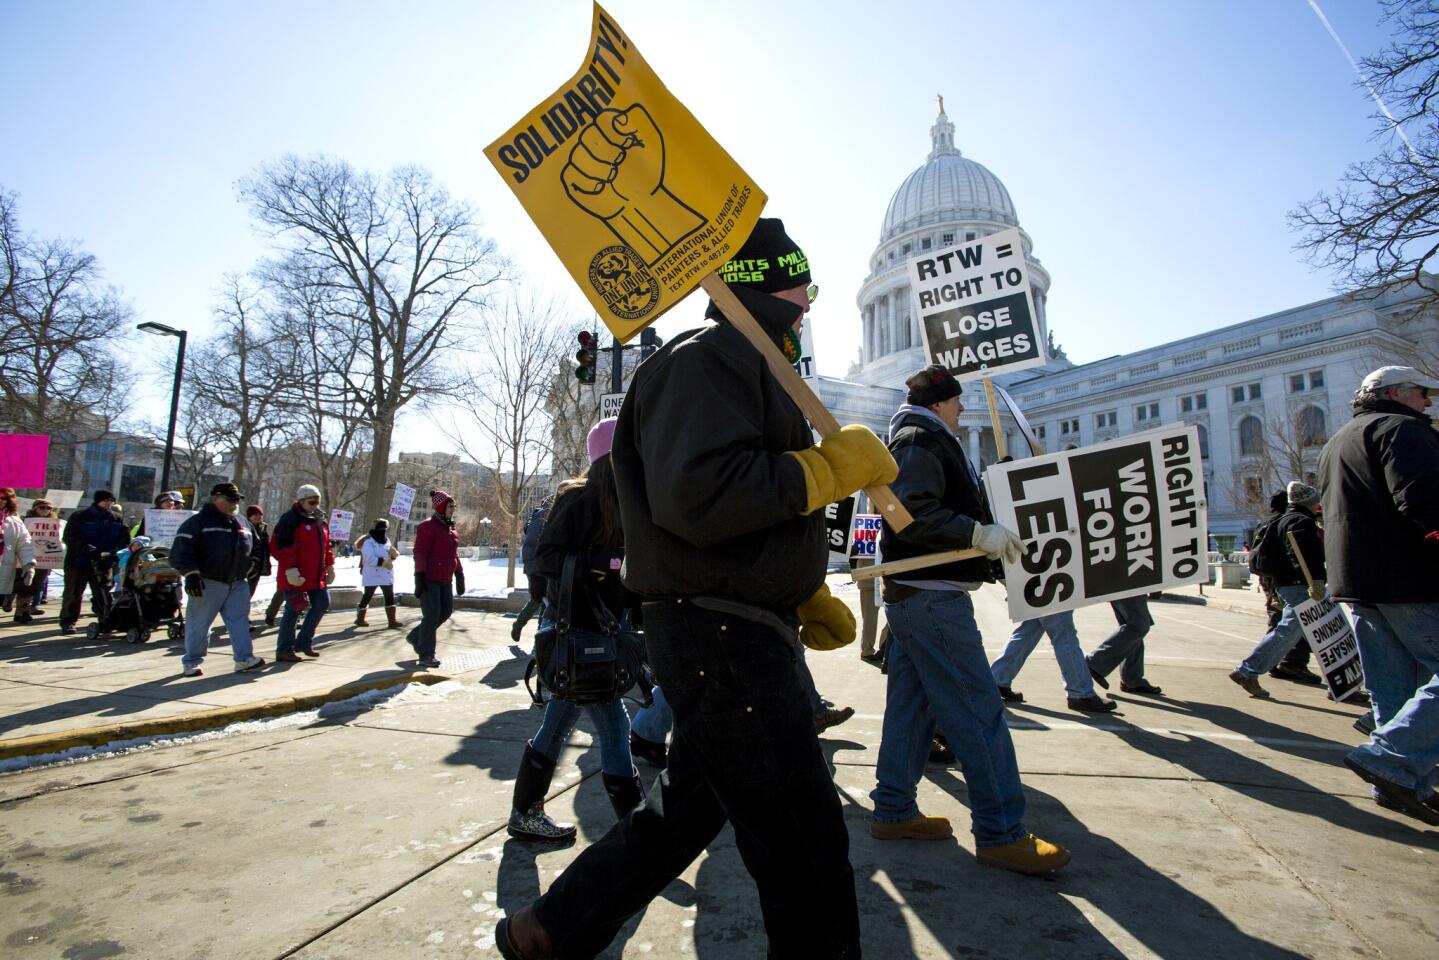 Protesters march around the Capitol after participating in a rally against a "right-to-work" proposal in Madison, Wis. Thousands of Wisconsin union workers rallied at the Capitol Saturday to protest a "right-to-work" proposal that would outlaw the mandatory payment of union dues.